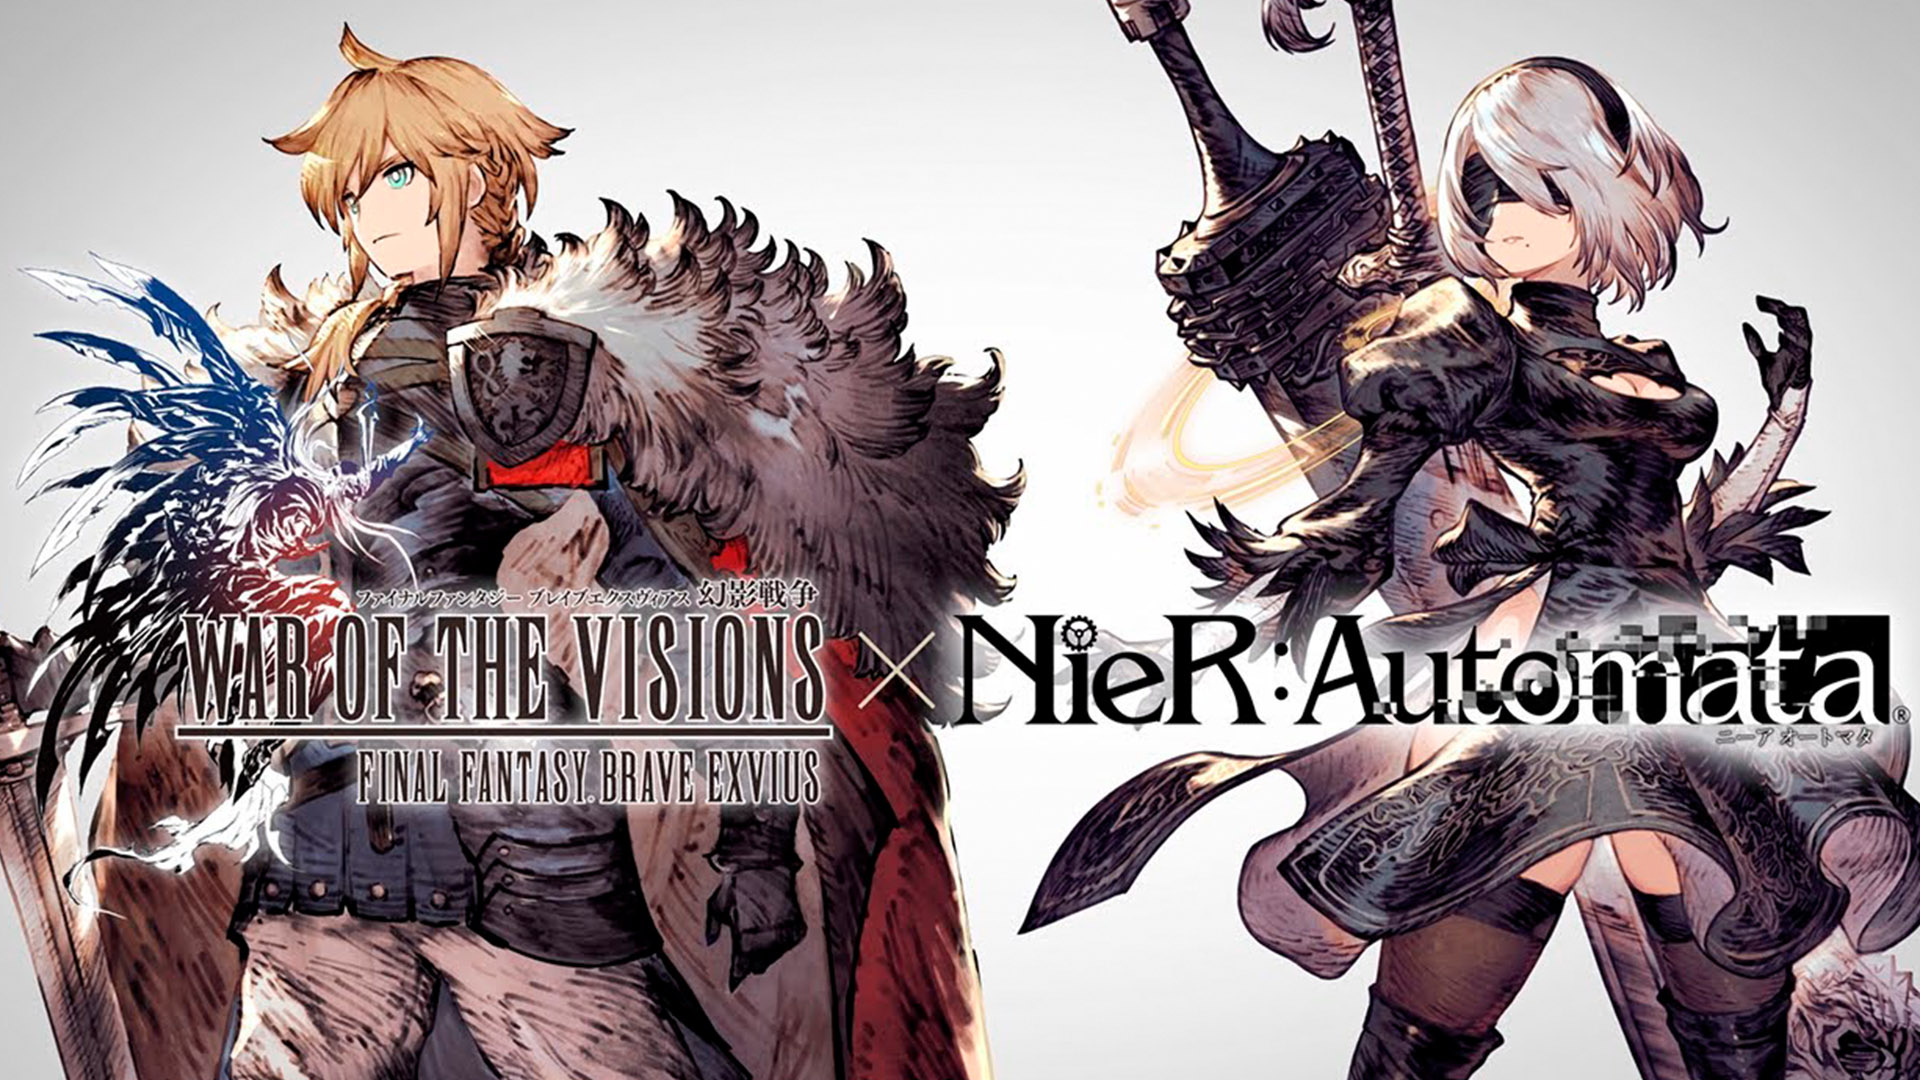 NiER Reincarnation Final Fantasy collaboration - All new characters,  events, and more